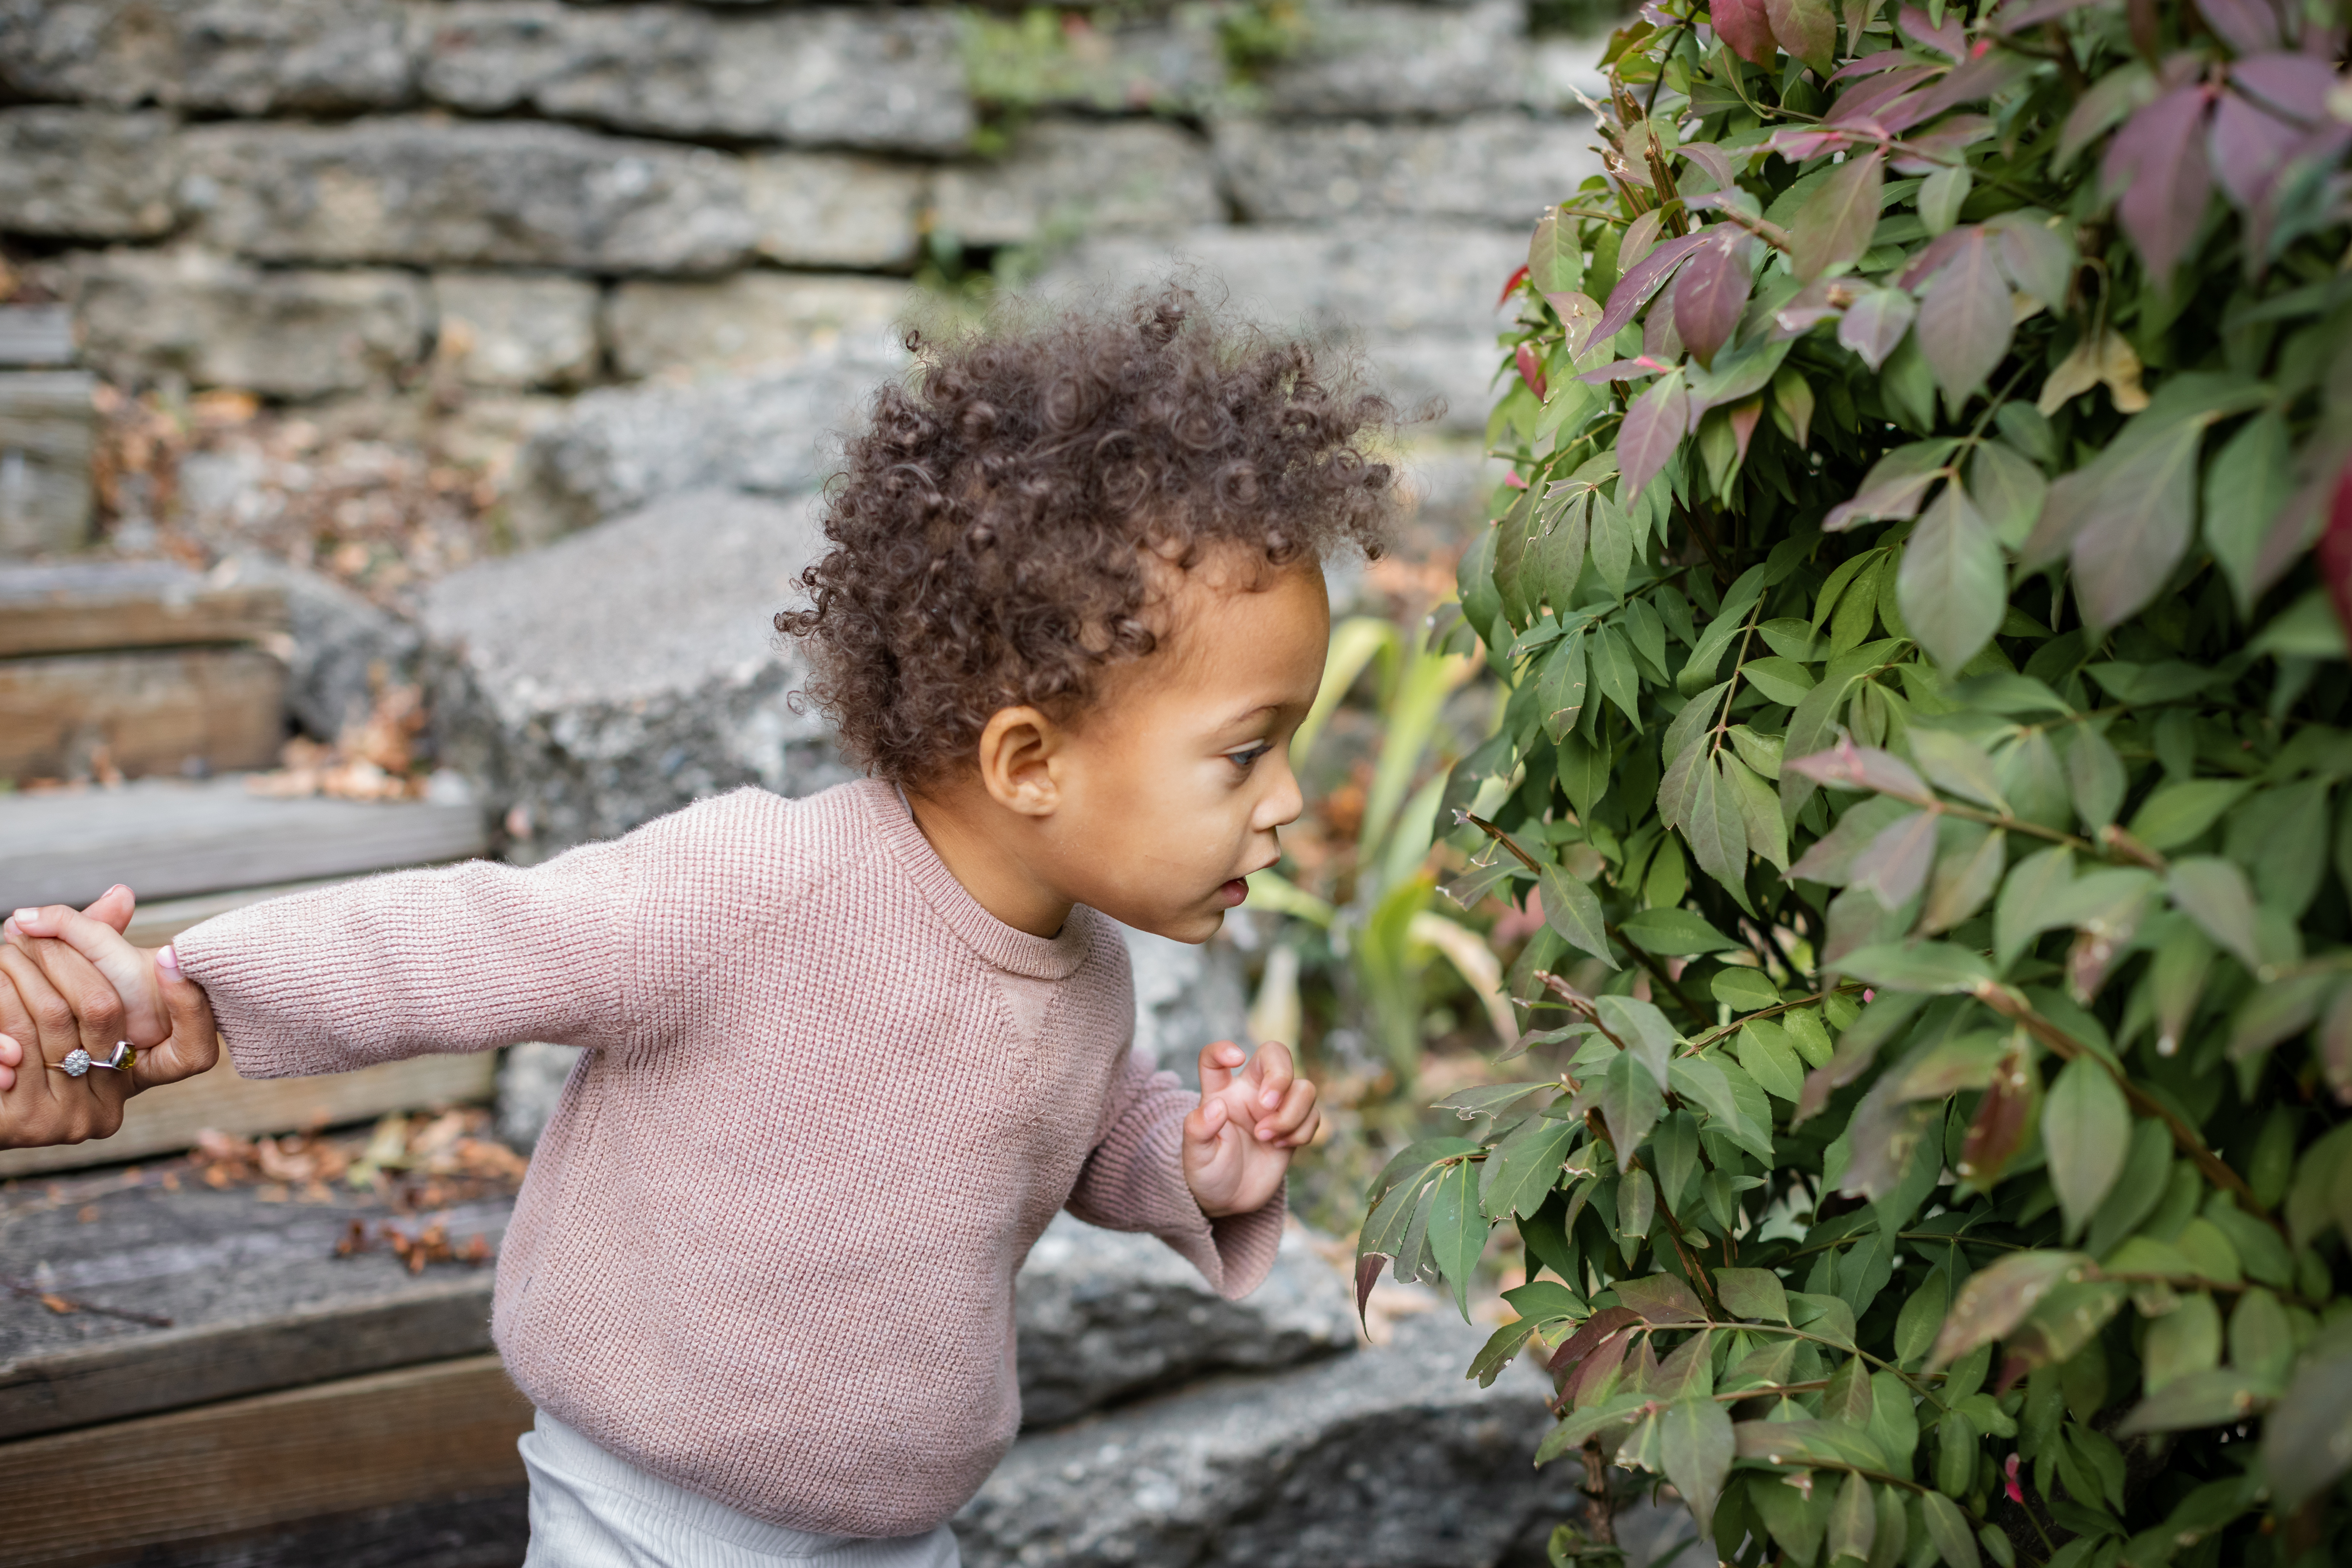 A small child looks closely at a leaf on a bush